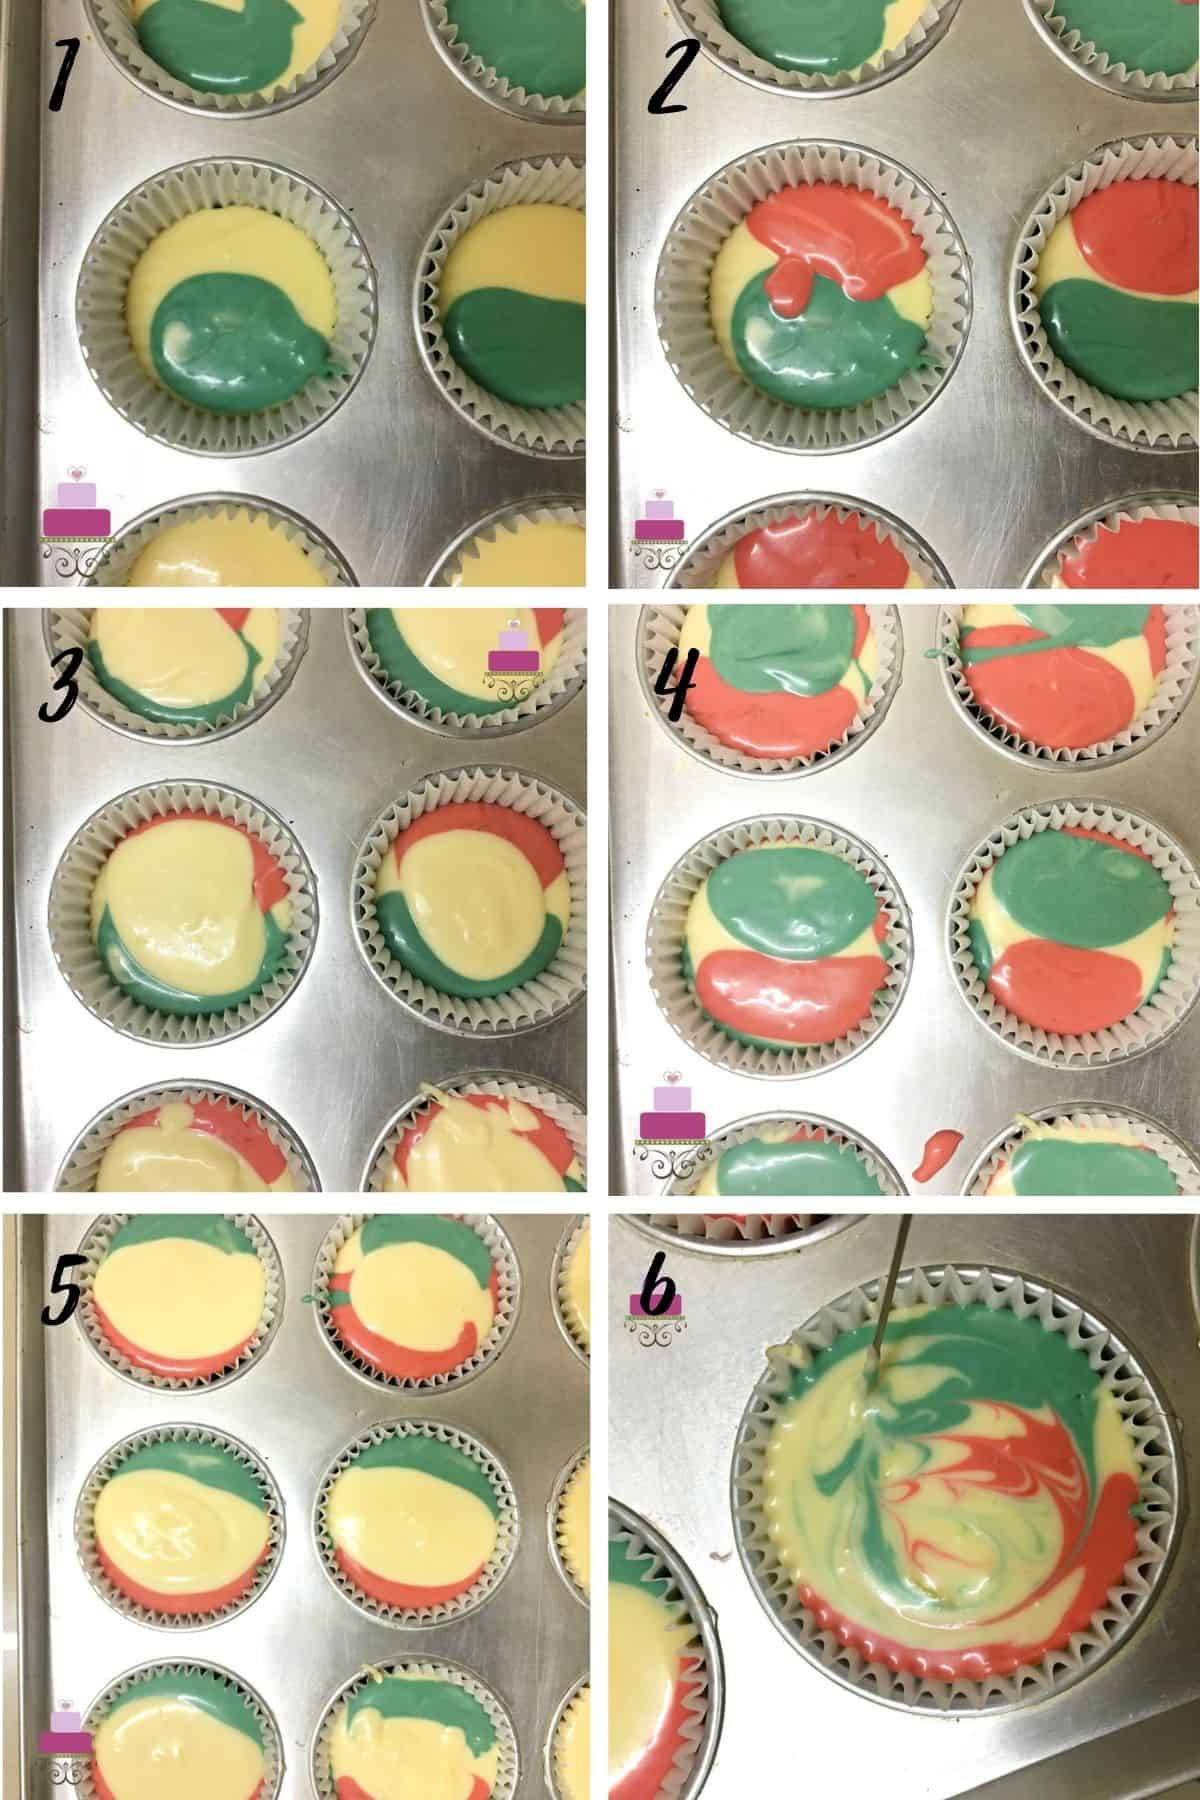 A poster of 6 images showing the step by step method of creating marbled cheesecake batter in yellow, red and green.